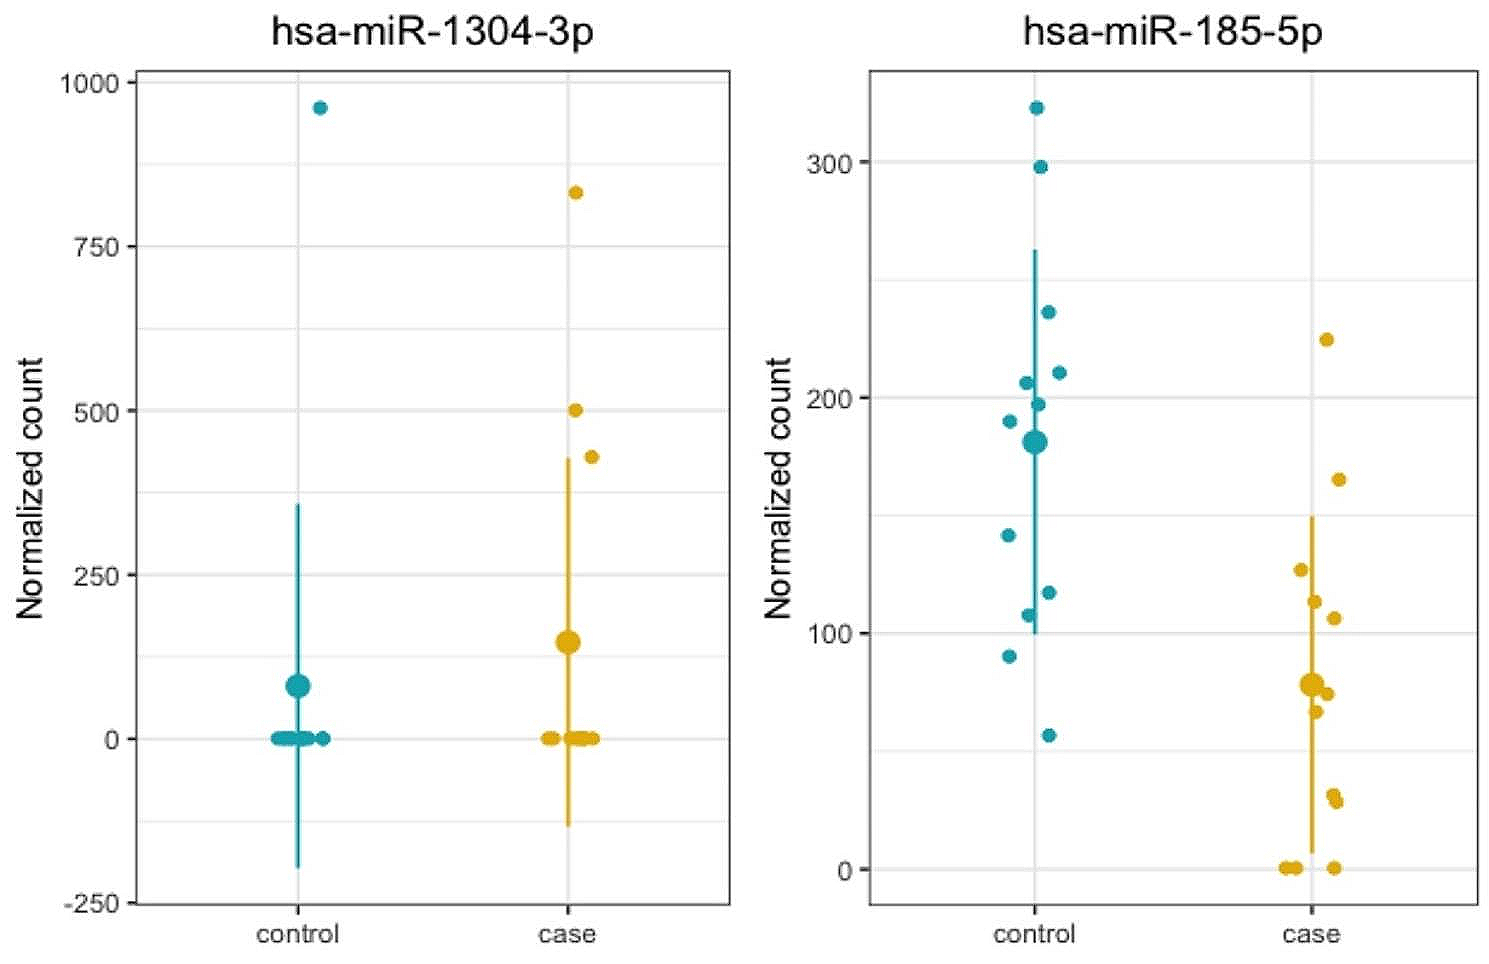 Next-generation sequencing profiling of miRNAs in individuals with 22q11.2 deletion syndrome revealed altered expression of miR-185-5p